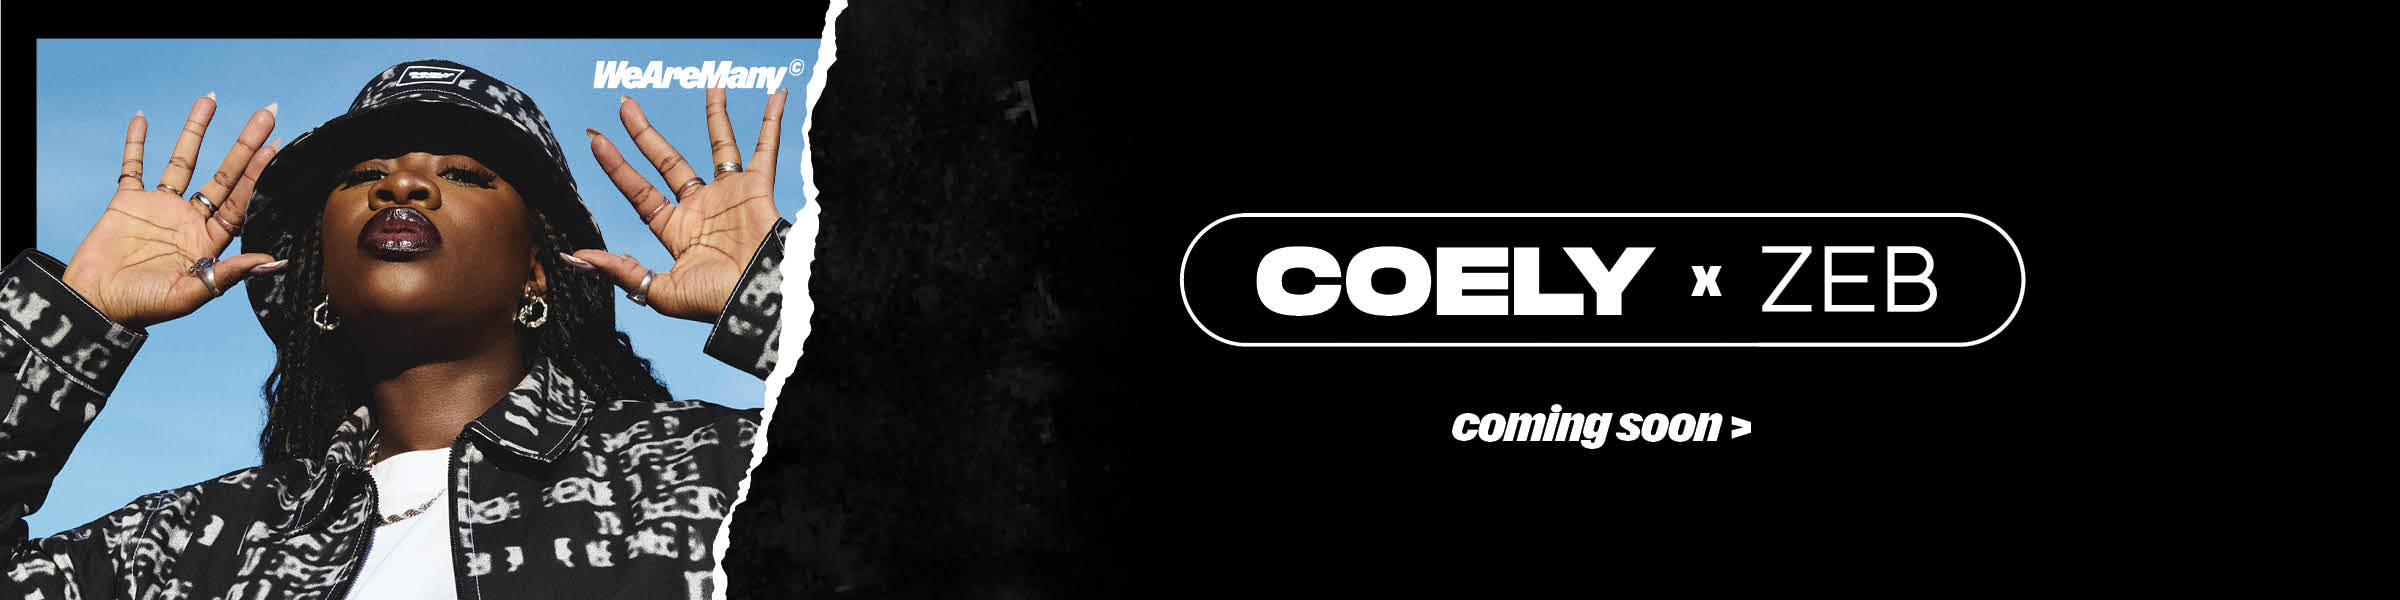 NOUVELLE COLAB : COELY x ZEB, coming soon